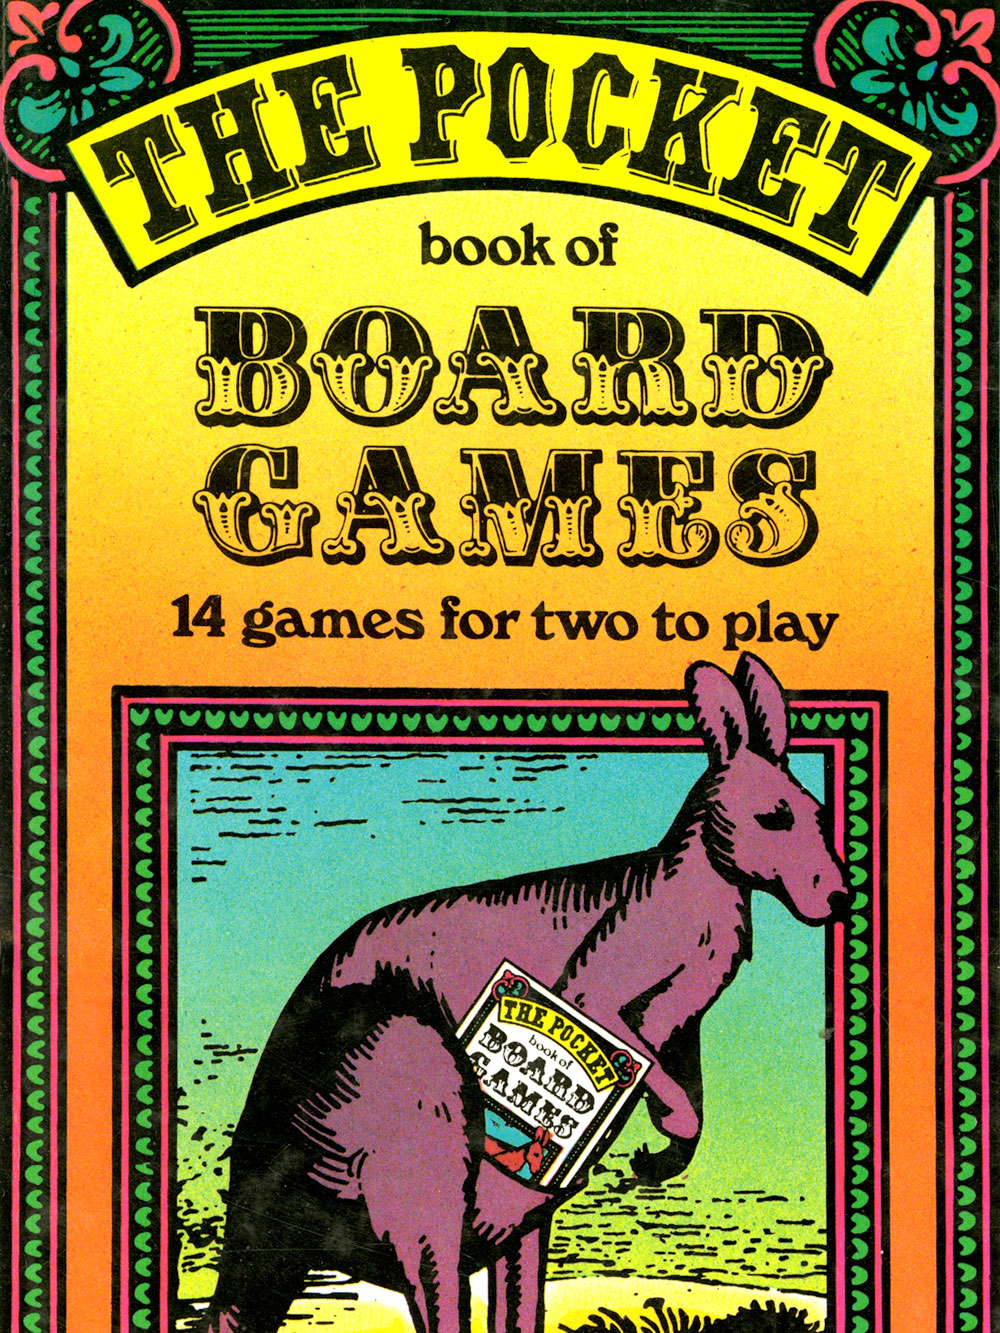 THE POCKET BOOK OF BOARD GAMES